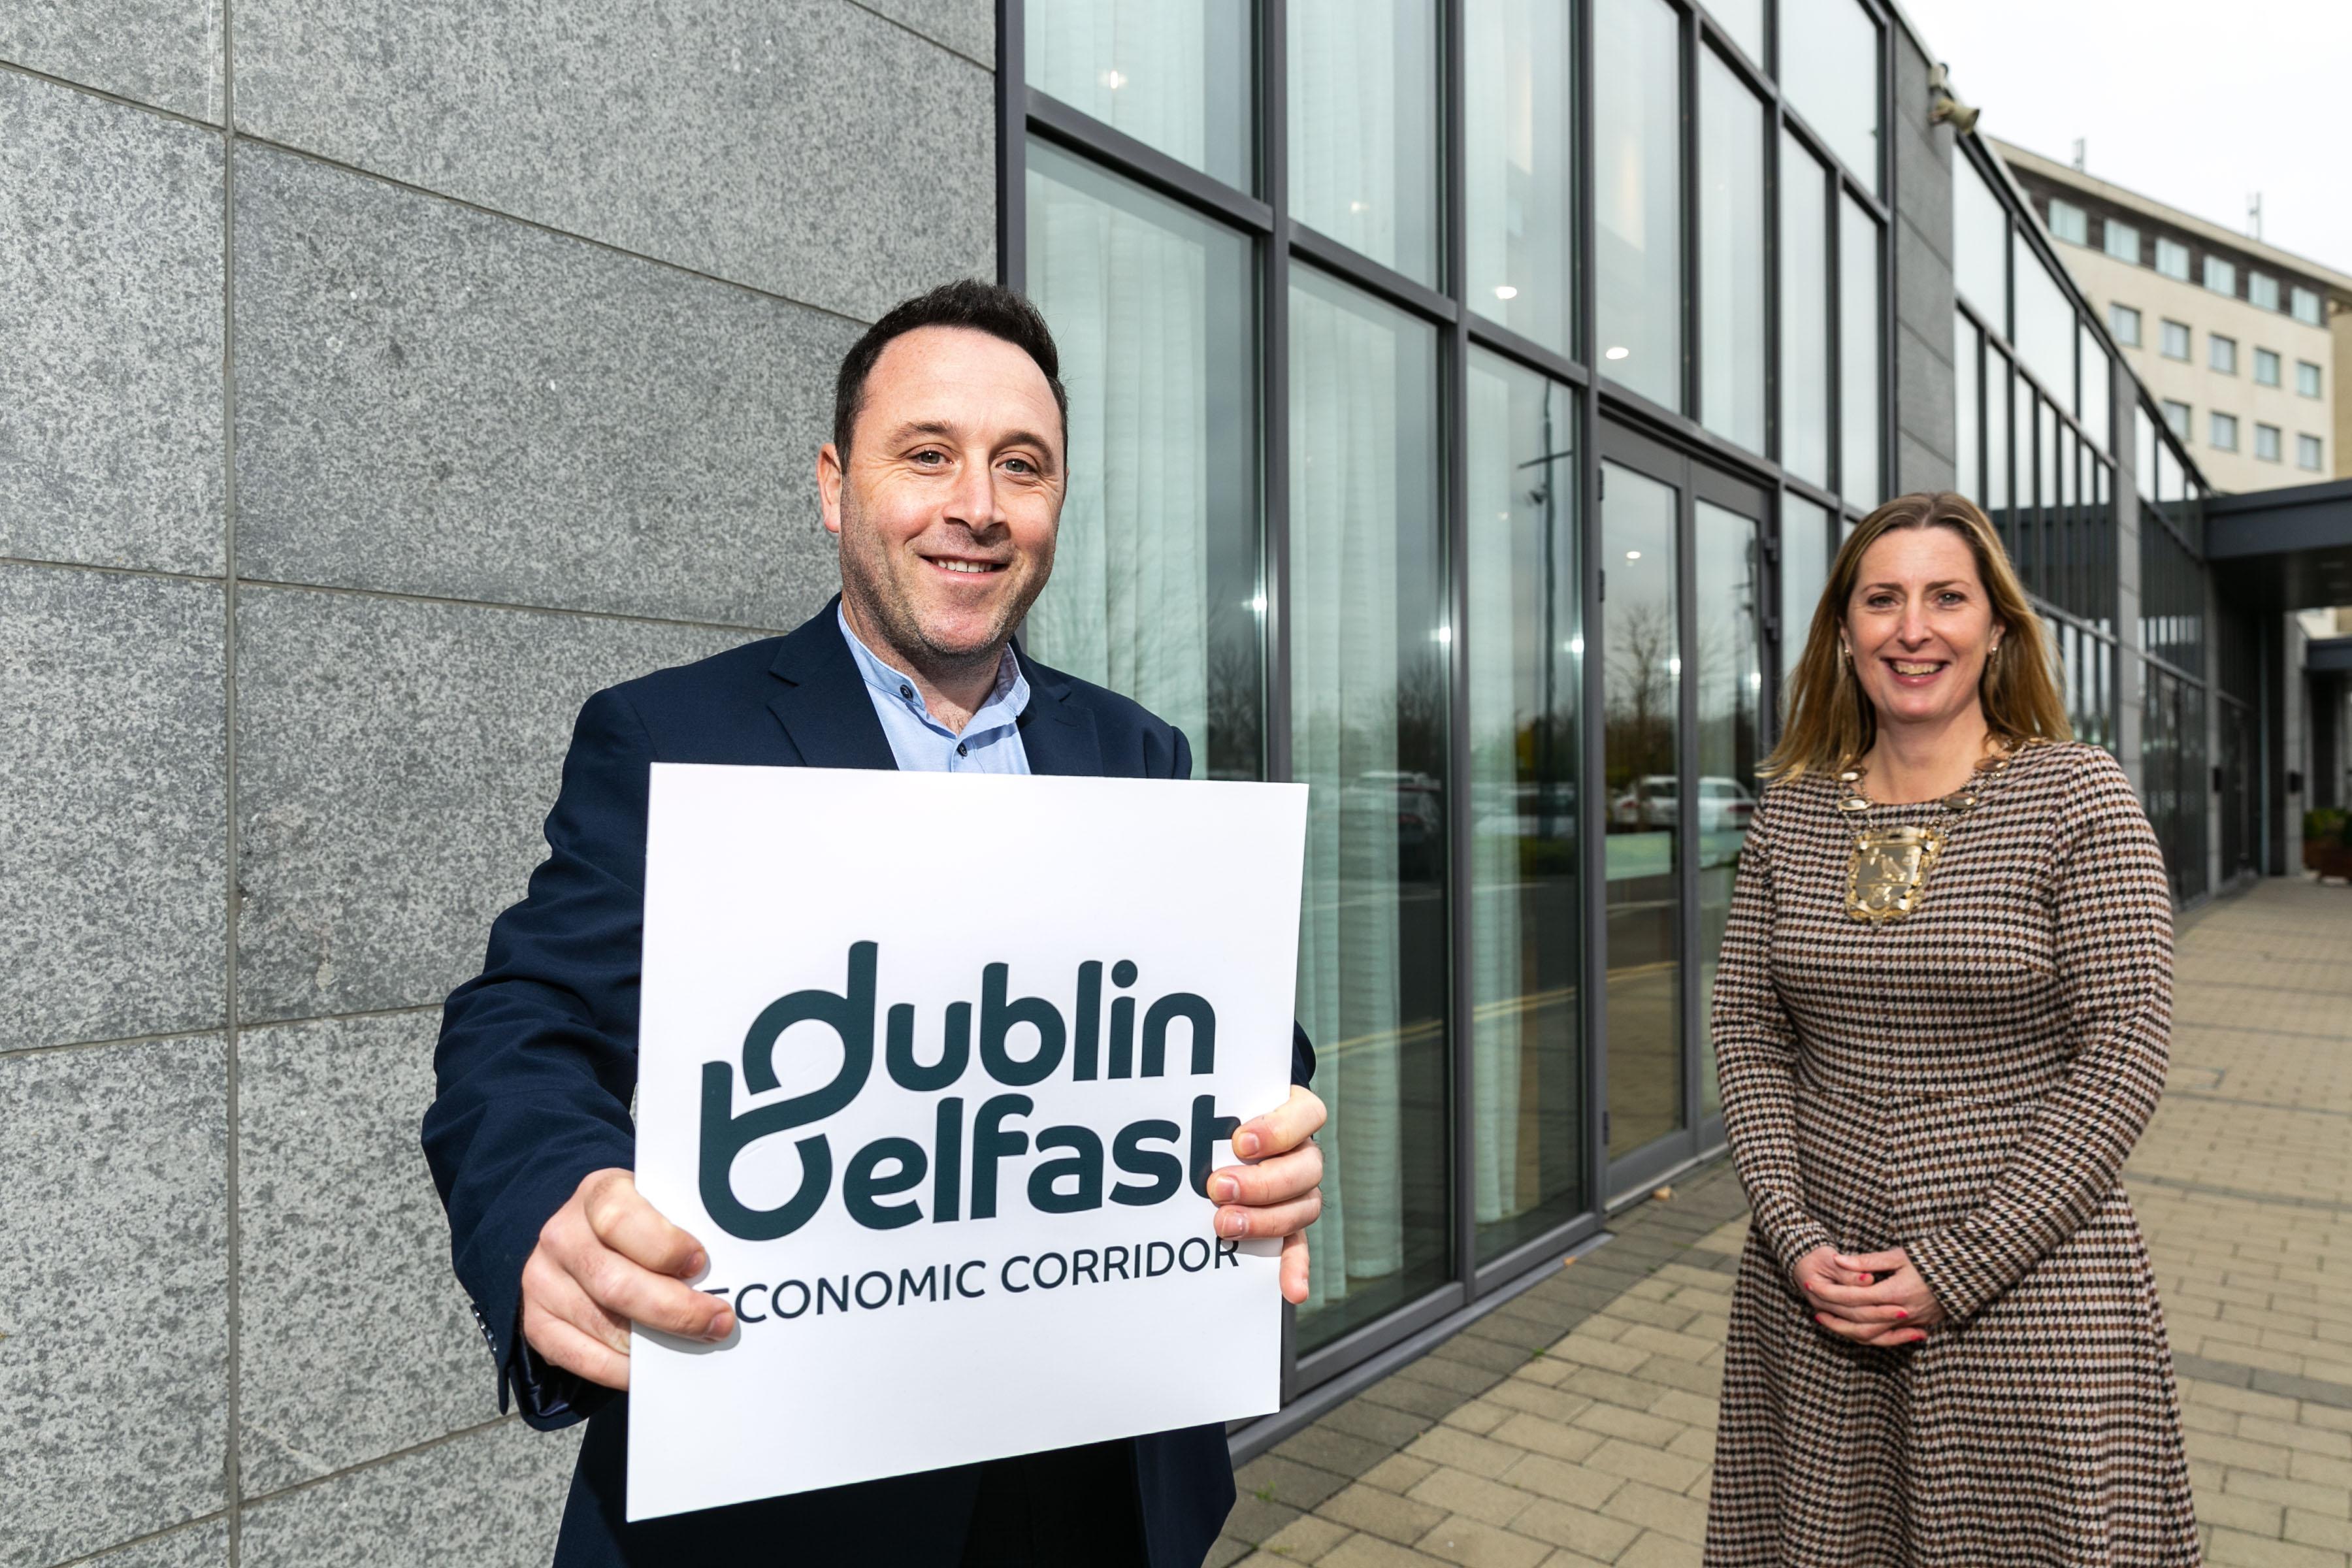 Fingal to benefit from joint effort to boost economy between Dublin and Belfast